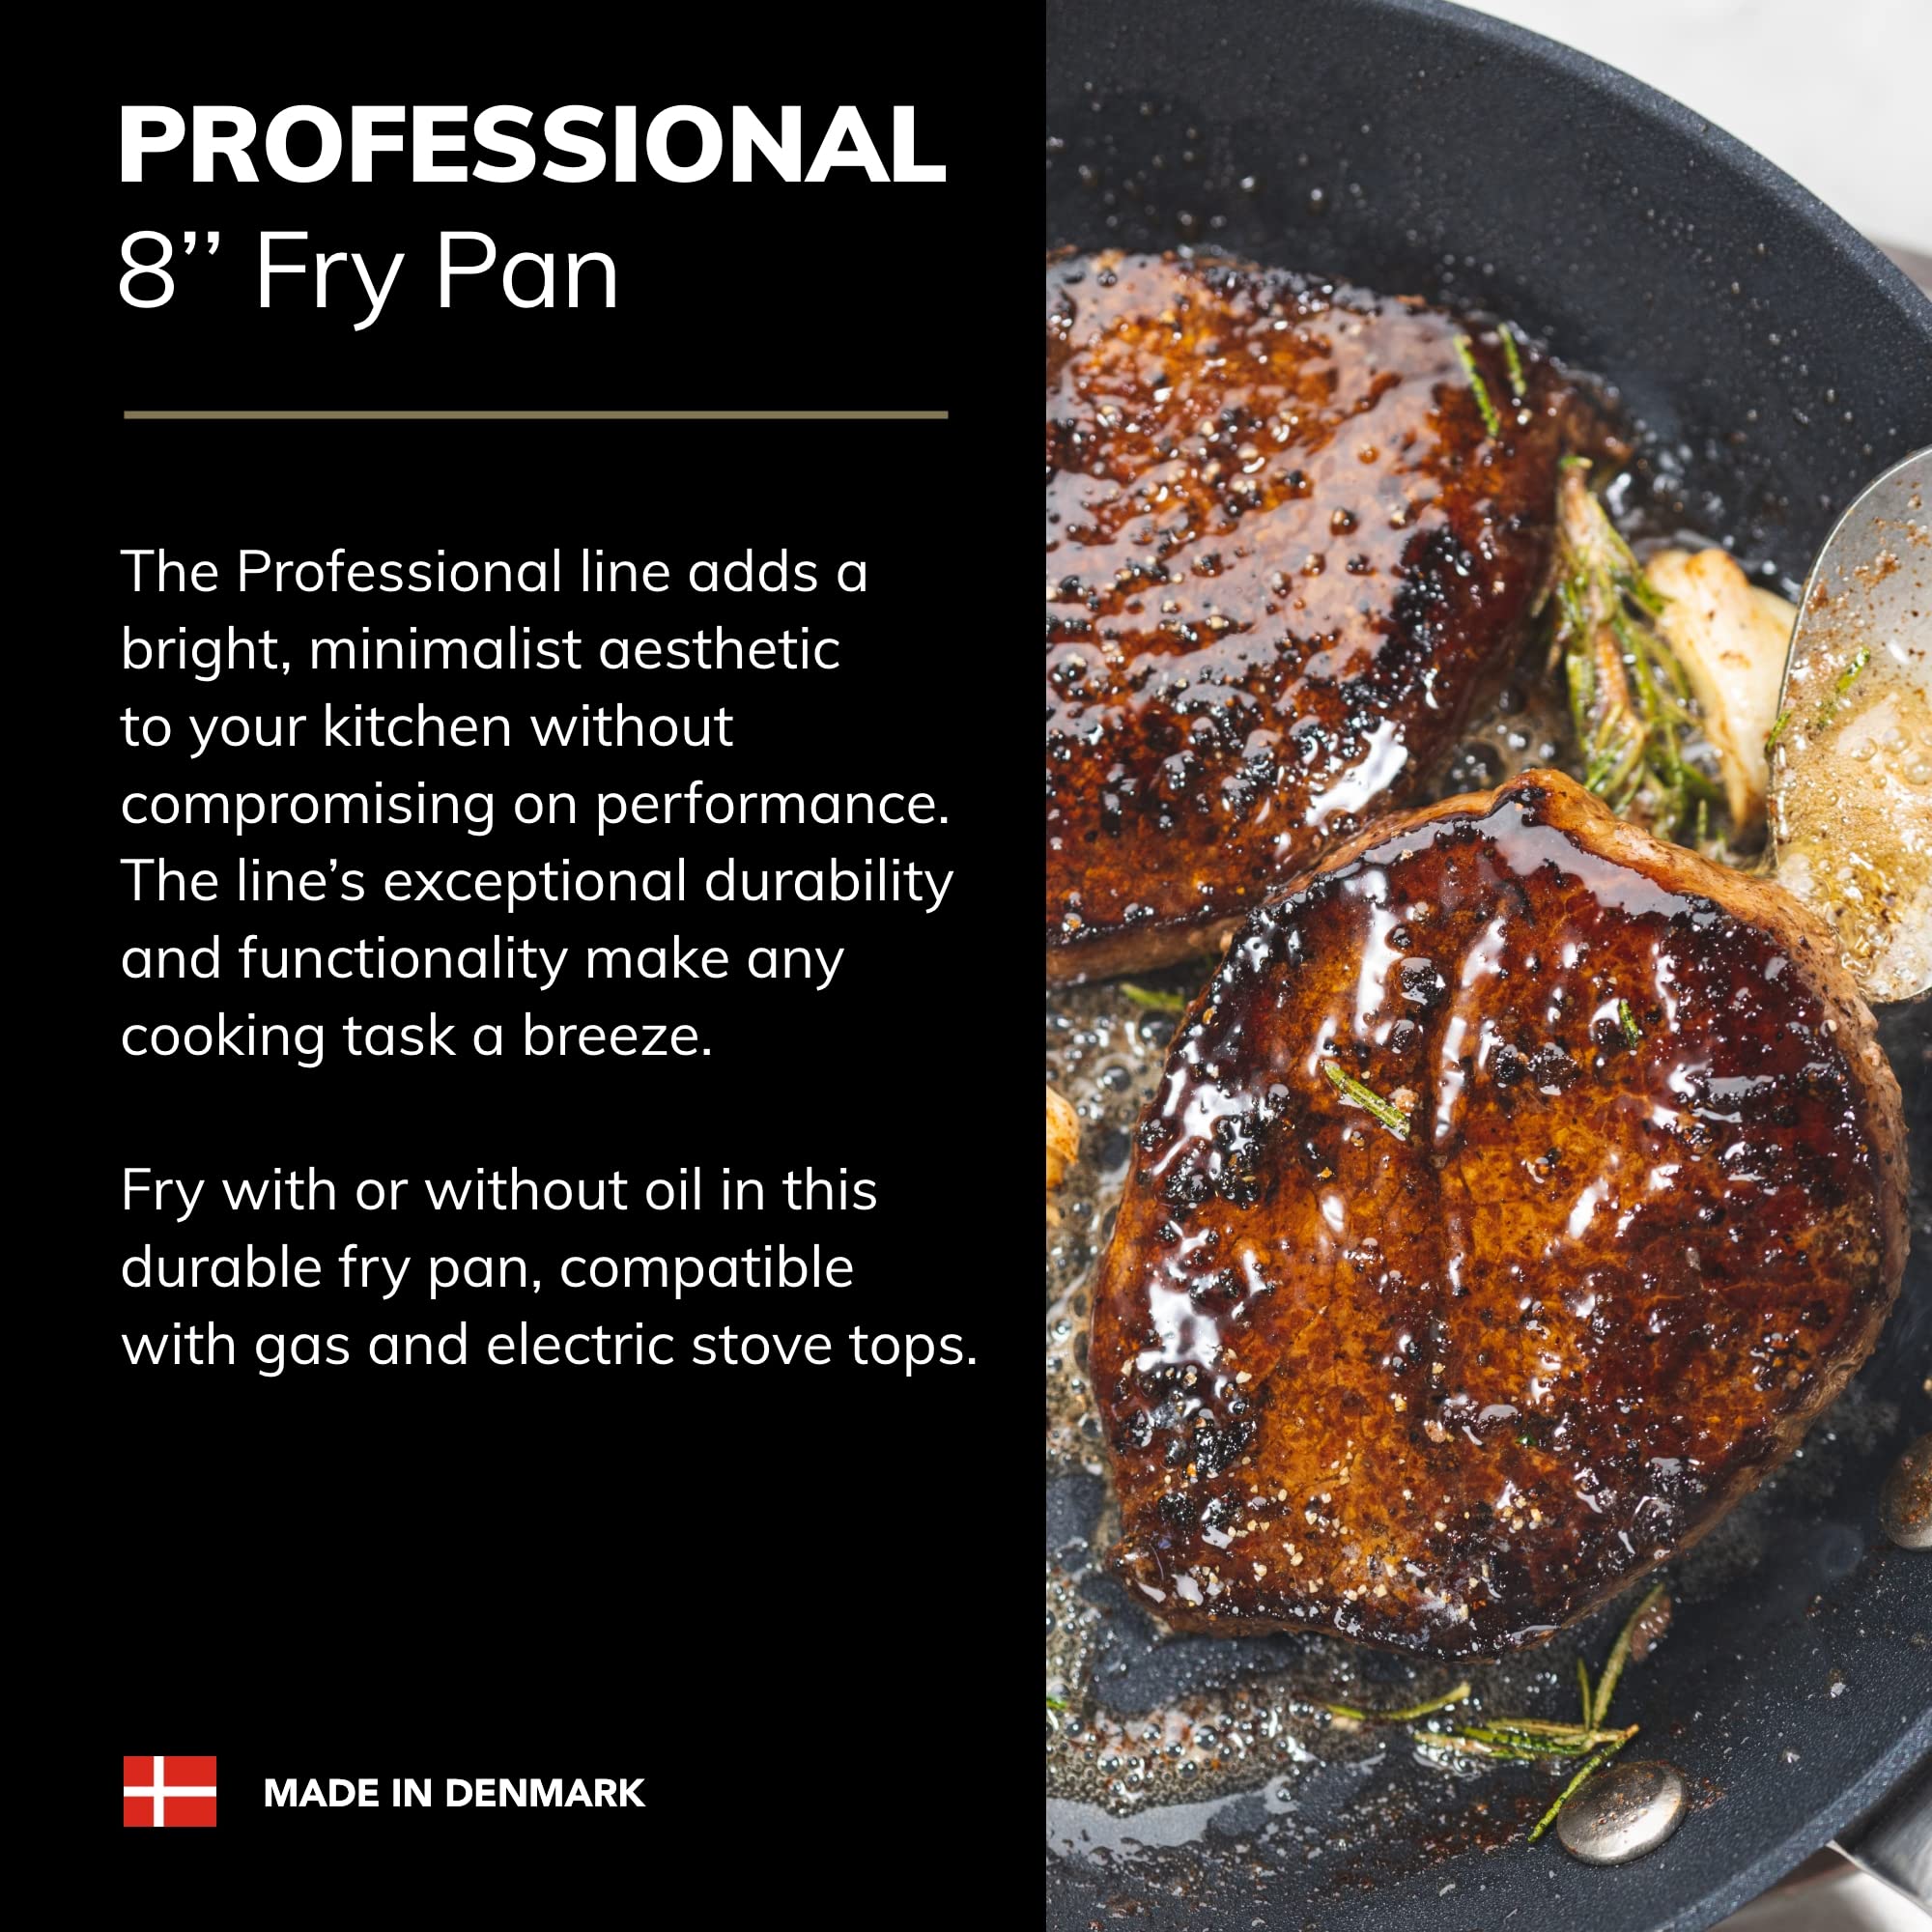 SCANPAN Professional 8” Fry Pan - Easy-to-Use Nonstick Cookware - Dishwasher, Metal Utensil & Oven Safe - Made in Denmark